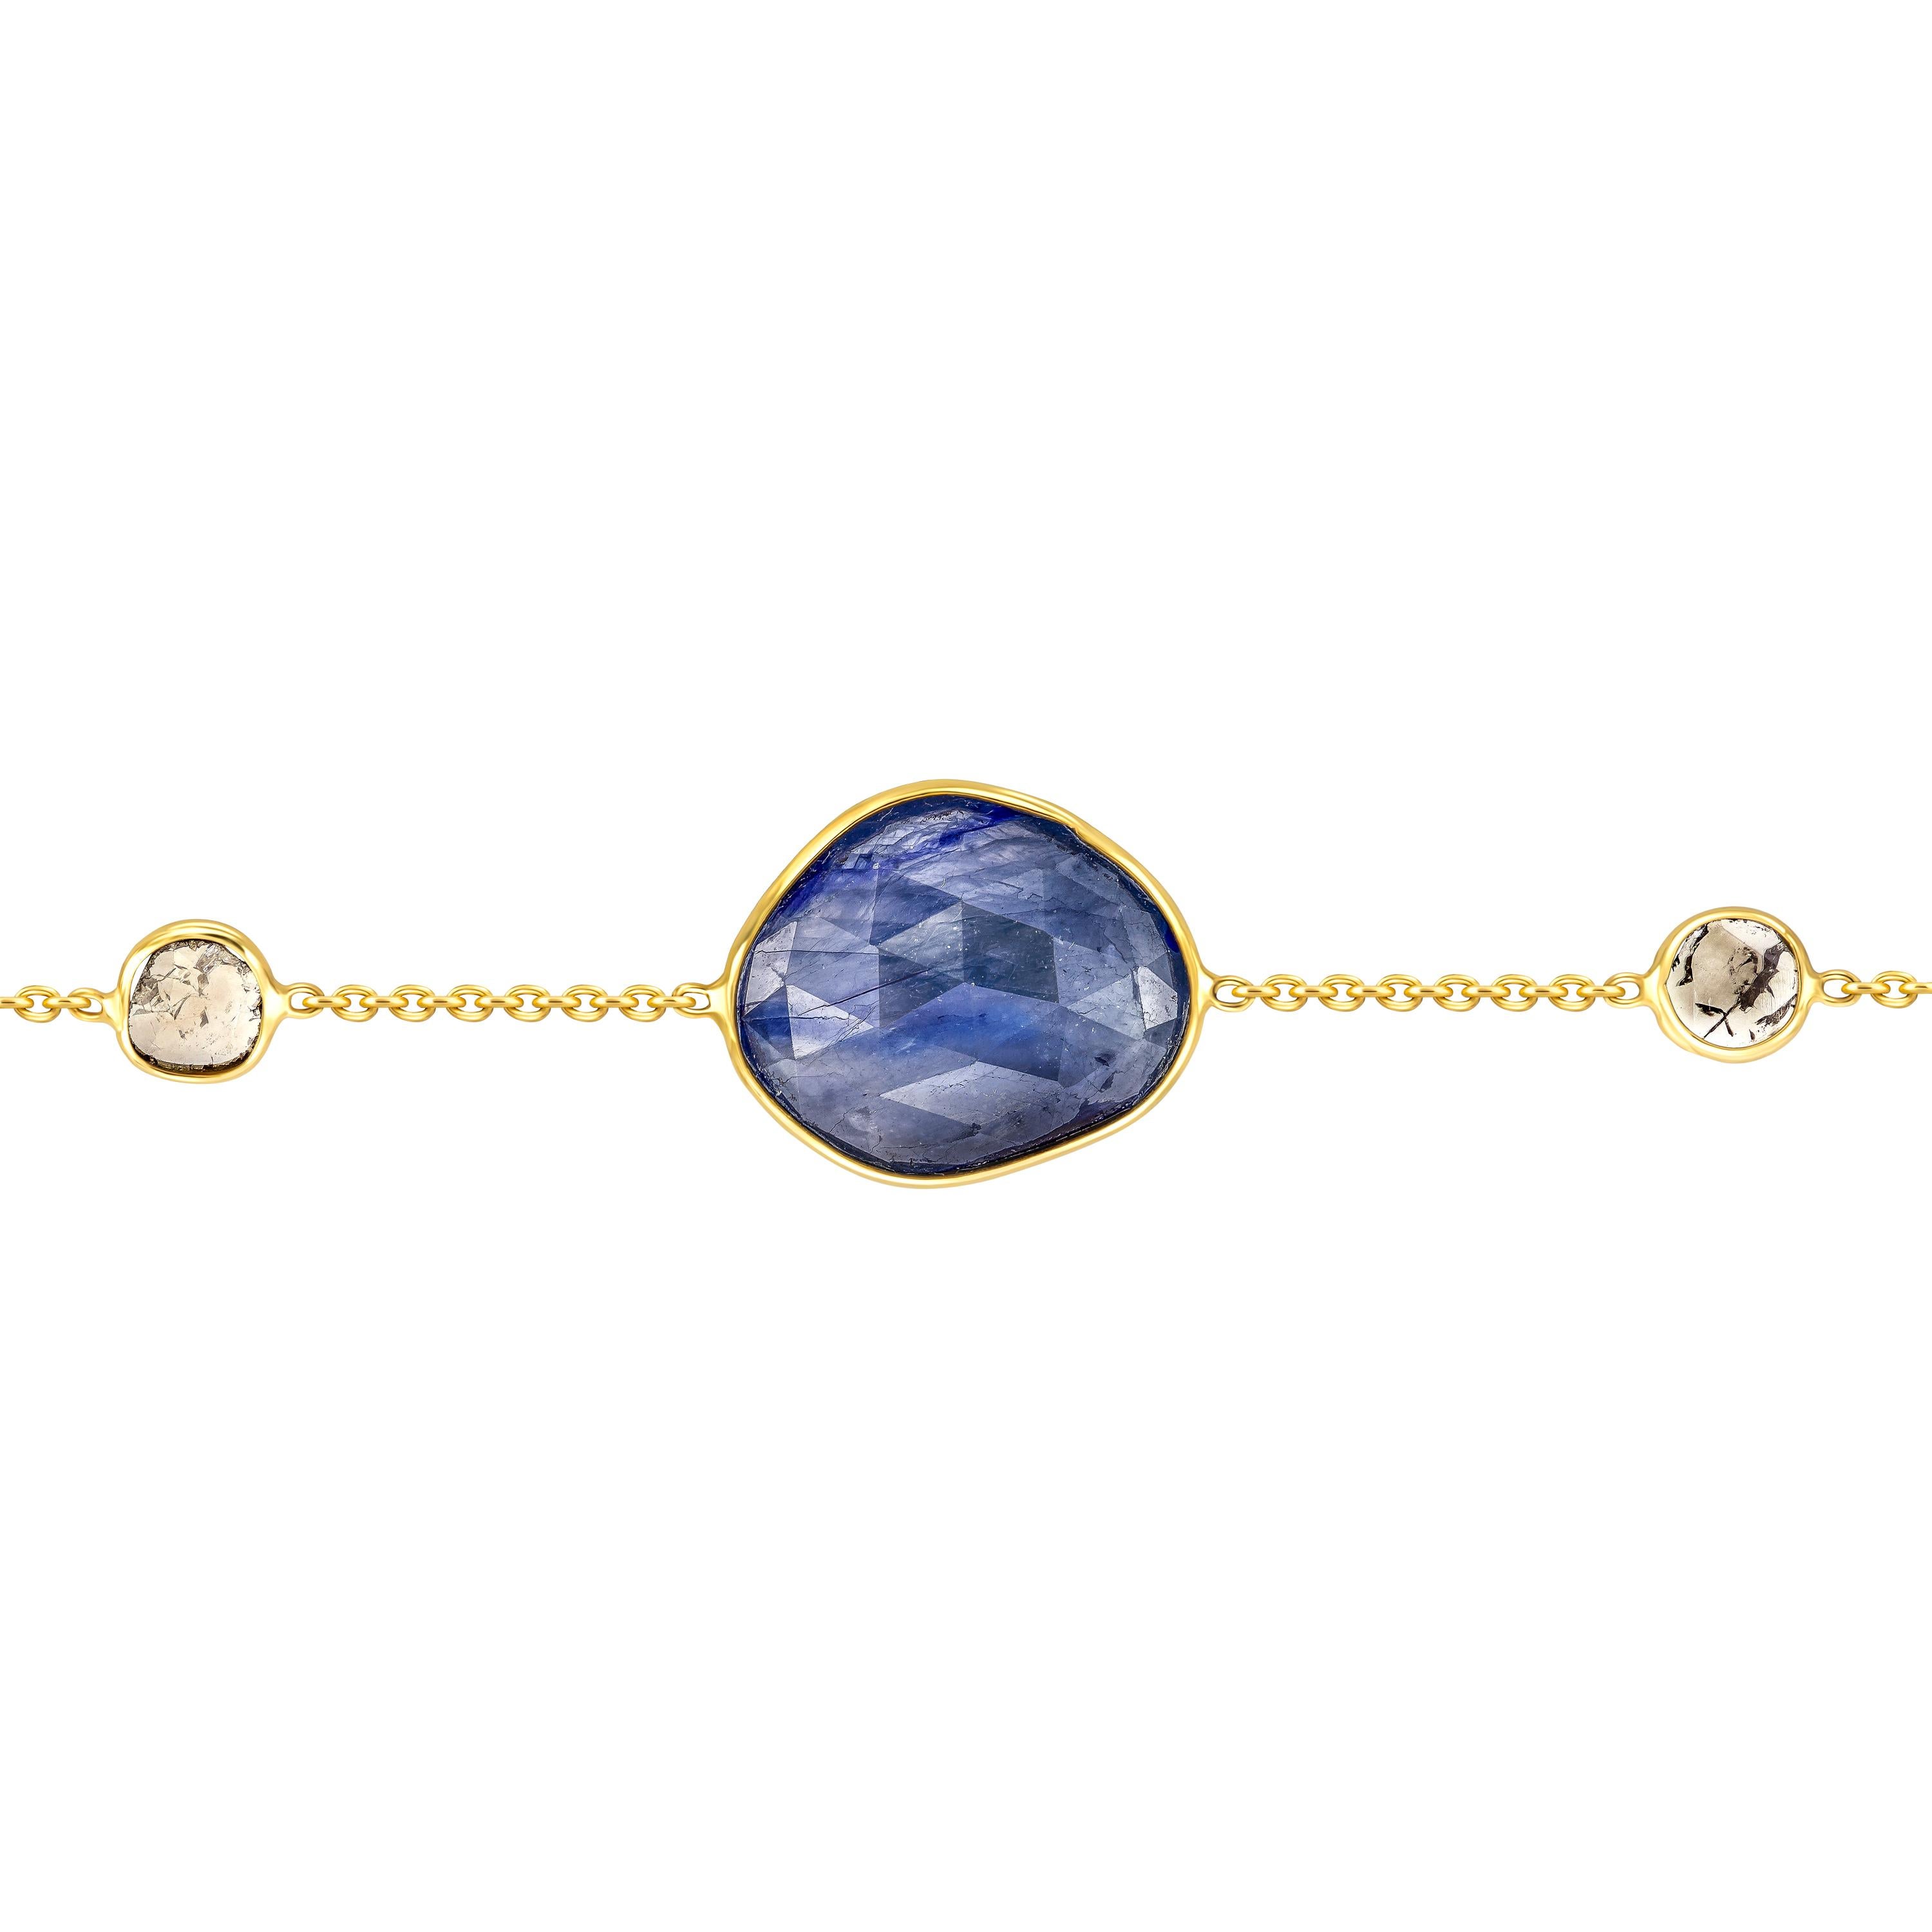 Adorn your wrist with this beautiful 4.05 Carat Rose Cut Blue Sapphire Bracelet featuring 0.15 Carat in two Diamond slices set in 18 Karat Yellow Gold. Each piece is hand made with a unique shaped precious stone in the center and sides so no two